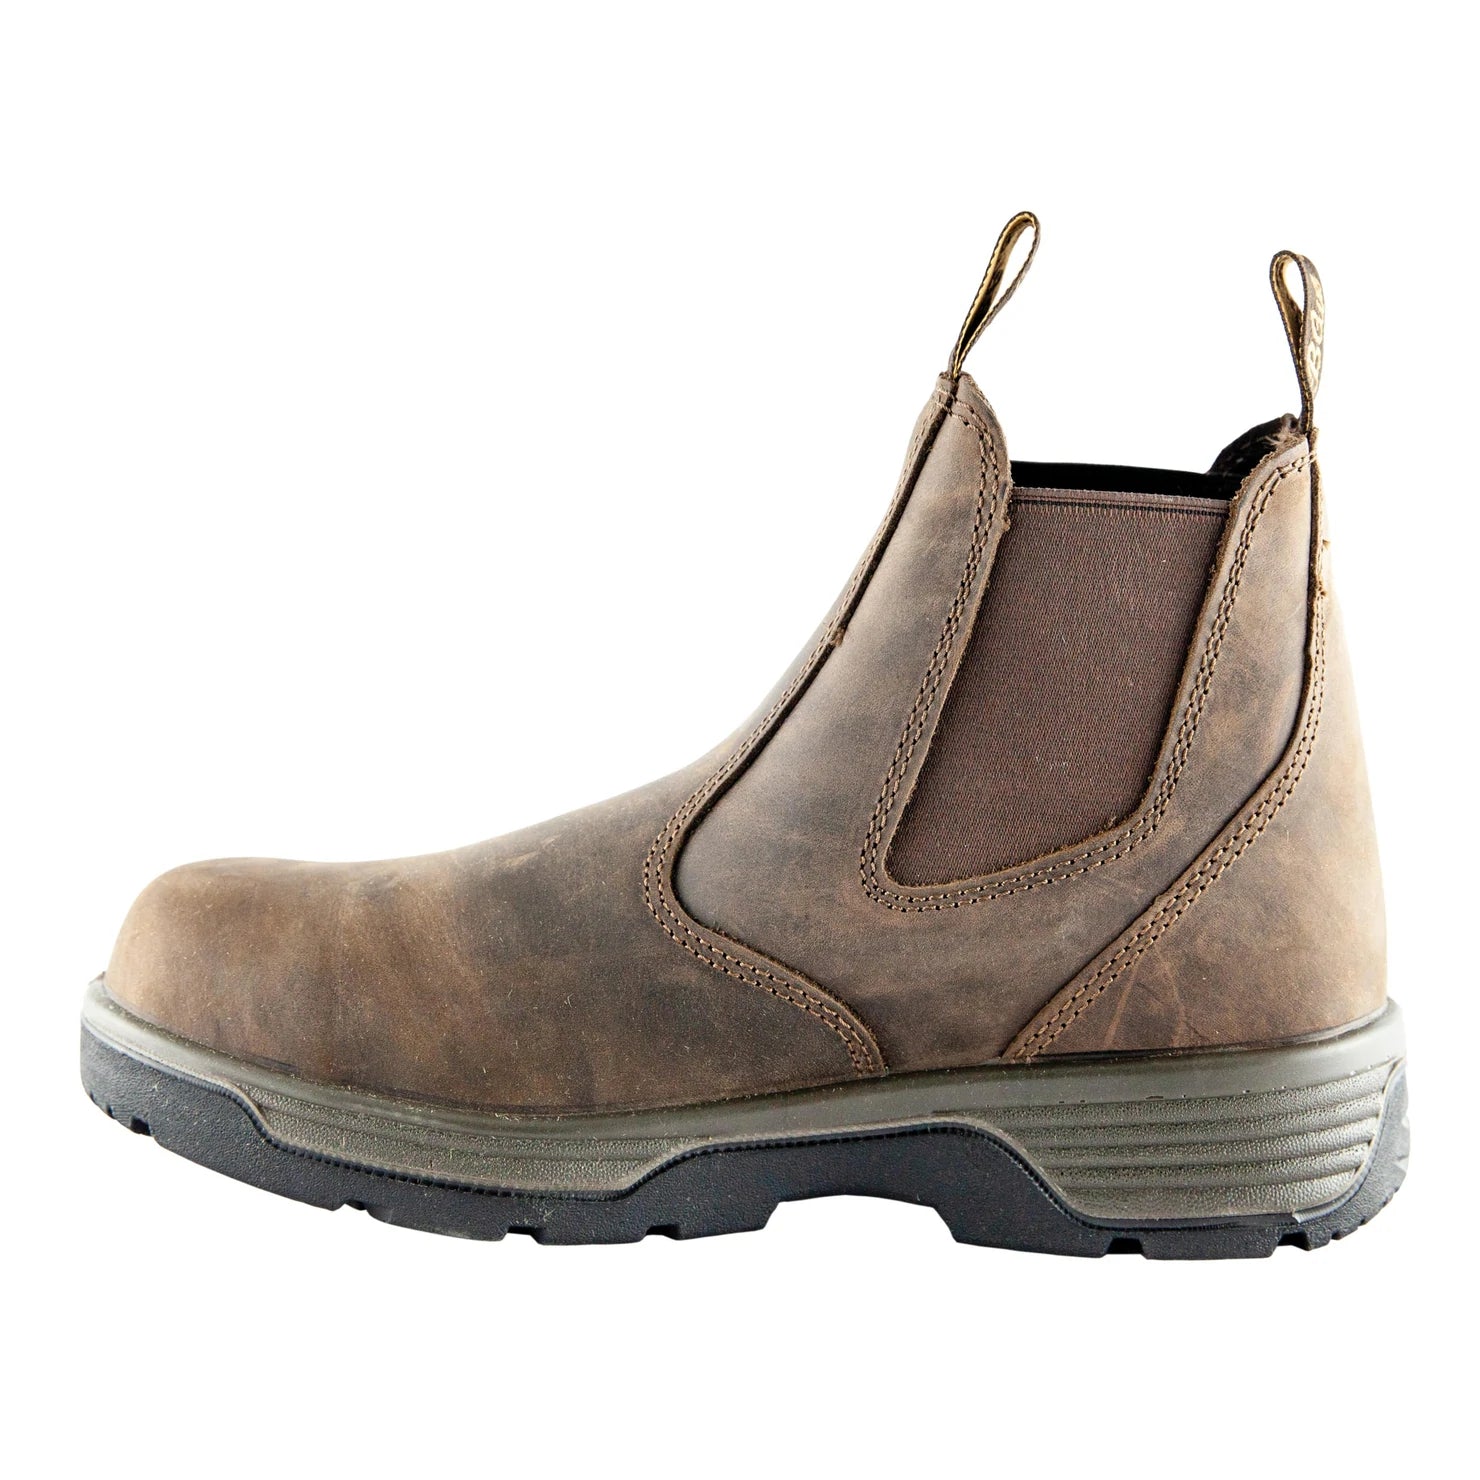 Redback Blue Tongue Fallbrook (Composite Toe) |  The Fire Center | Fuego Fire Center | Store | FIREFIGHTER GEAR | FREE SHIPPING | 6’’ Slip on pull loop design with versatile functionality to fit all your jobs needs. This lightweight boot features a 100% Oiled Nubuck leather upper construction for long term wear and is internally leather lined for softness and comfort.